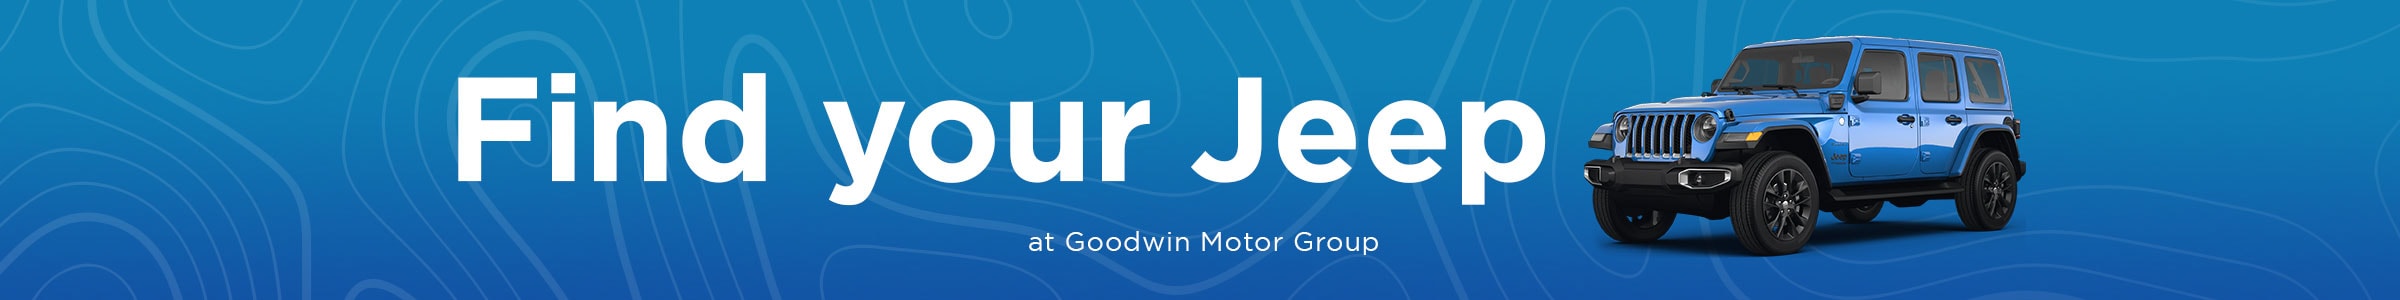 Blue image header that says Find your Jeep at Goodwin Motor Group.